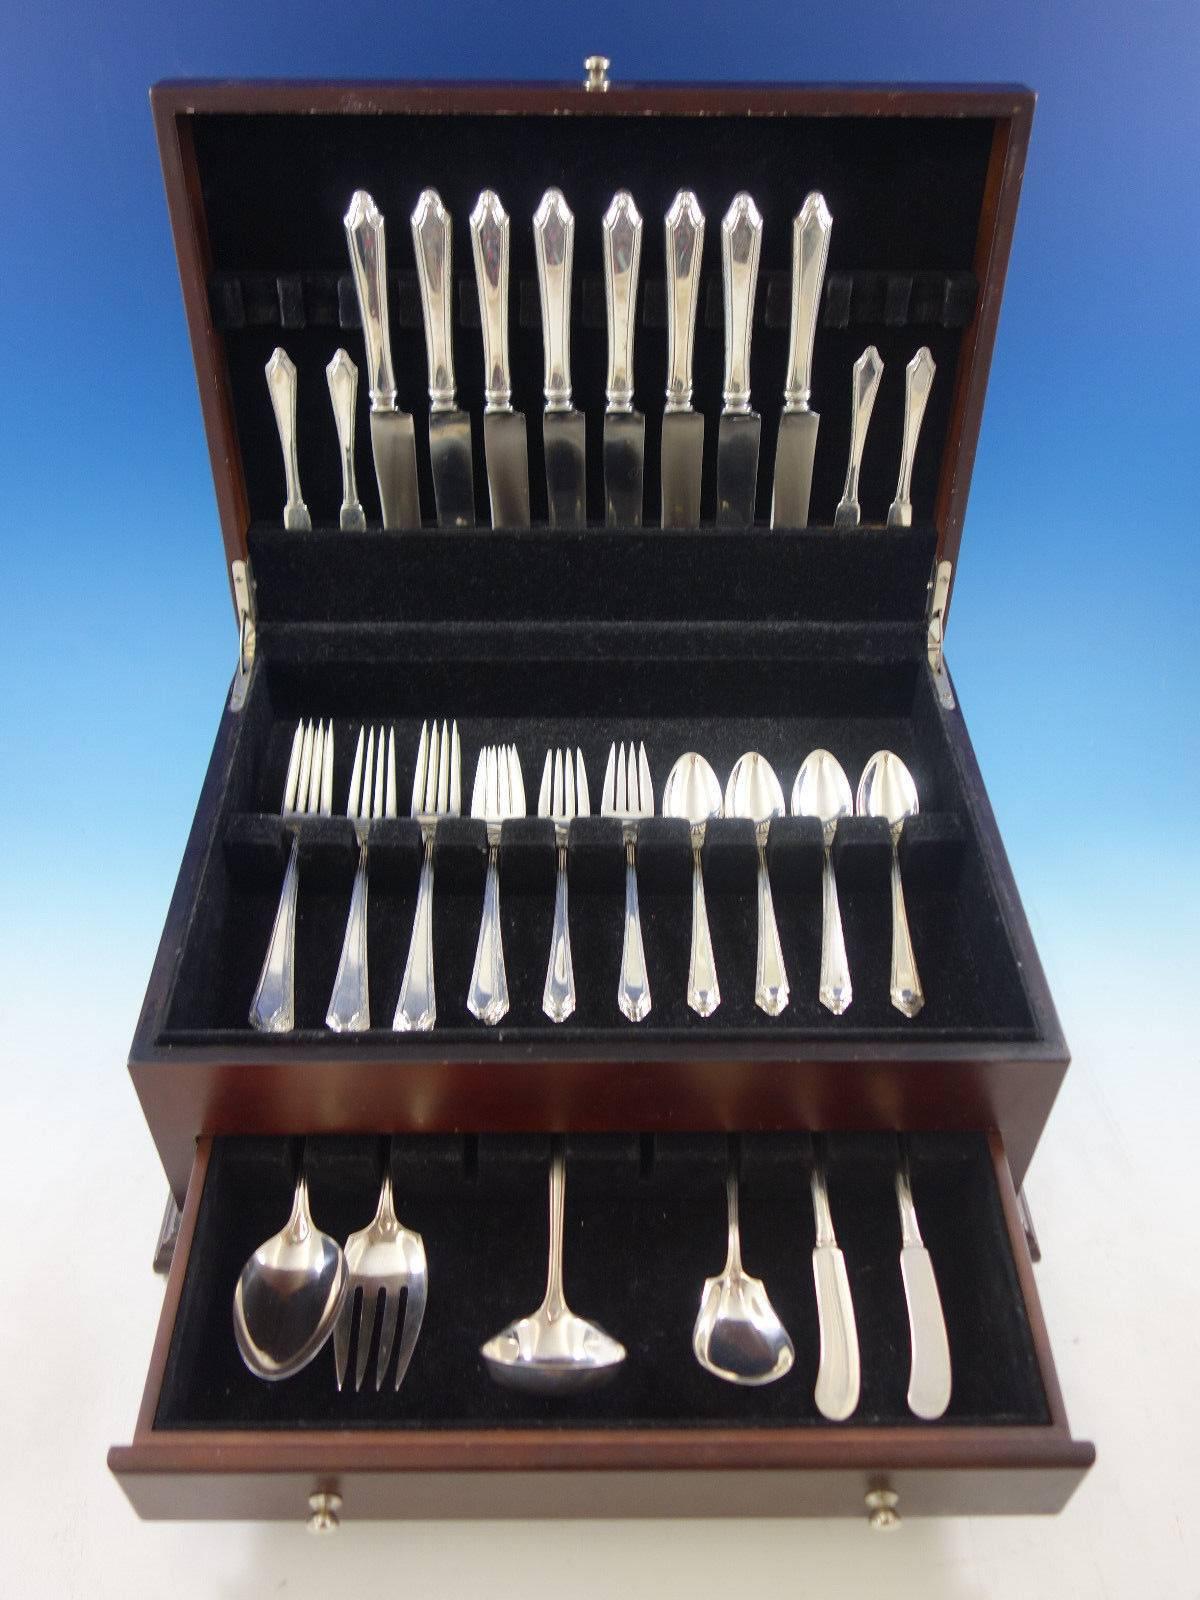 Virginia Carvel by Towle sterling silver Flatware set, 44 pieces. This set includes 

eight knives, 8 7/8